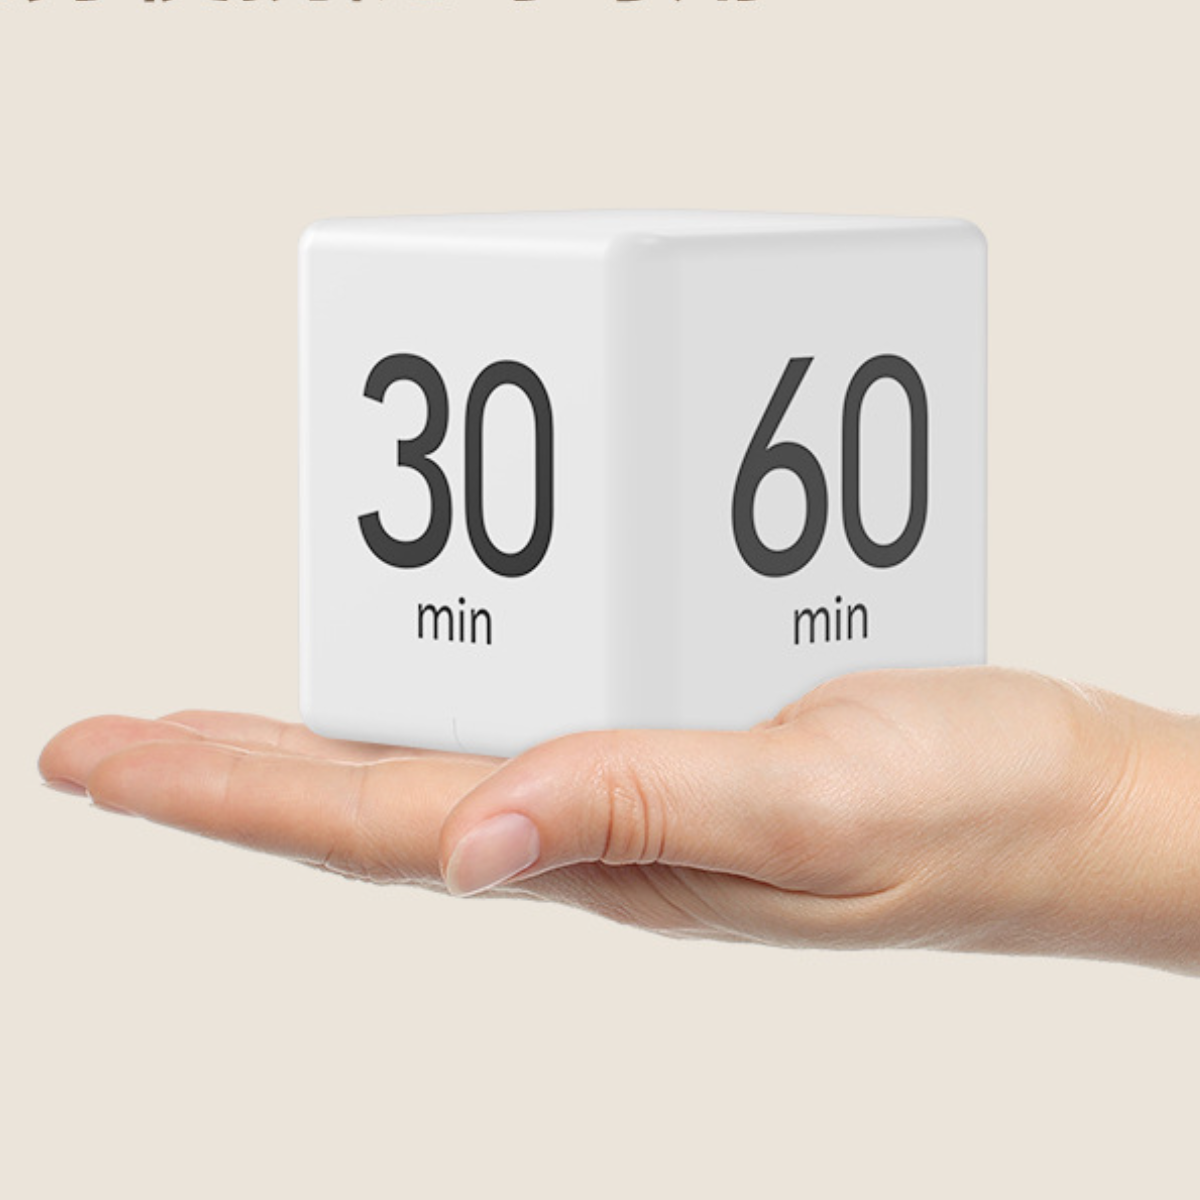 to Timer Precise minutes timing Rubik\'s UWOT Easy Schwarz 15-20-30-60 Cube Timer: Countdown operate